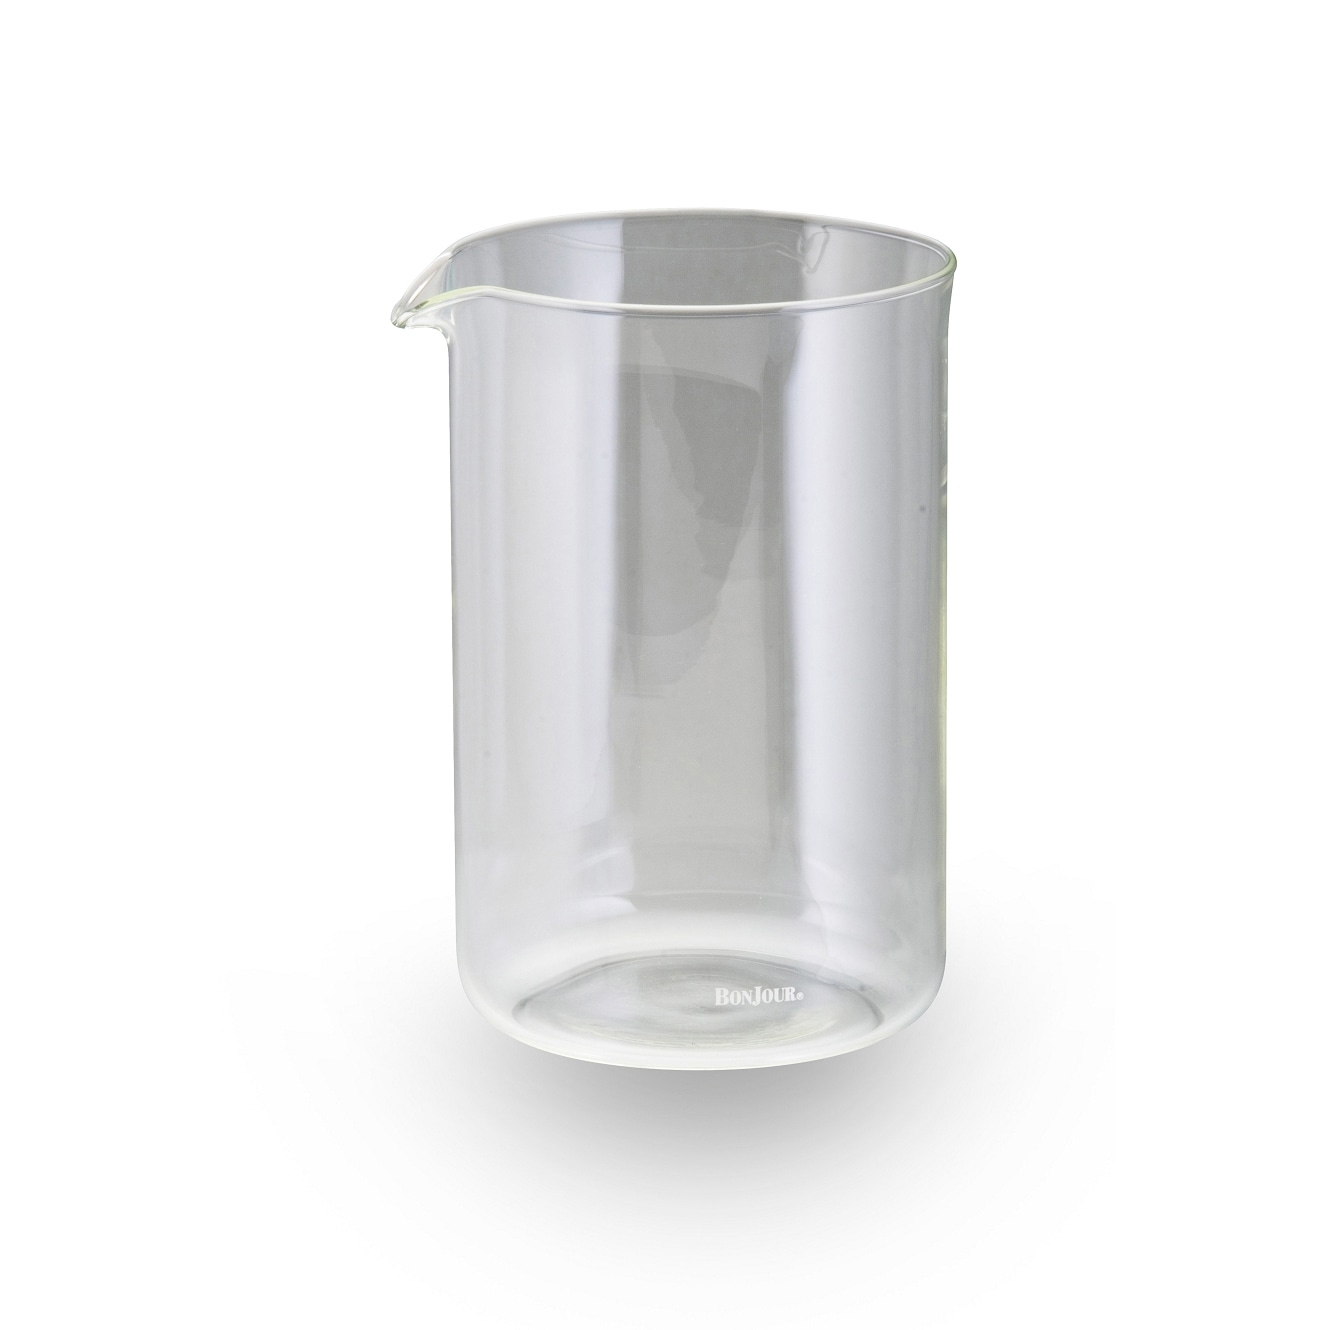 https://ak1.ostkcdn.com/images/products/7225974/7225974/BonJour-Coffee-and-Tea-12-Cup-Clear-Replacement-Glass-L14708659.jpg